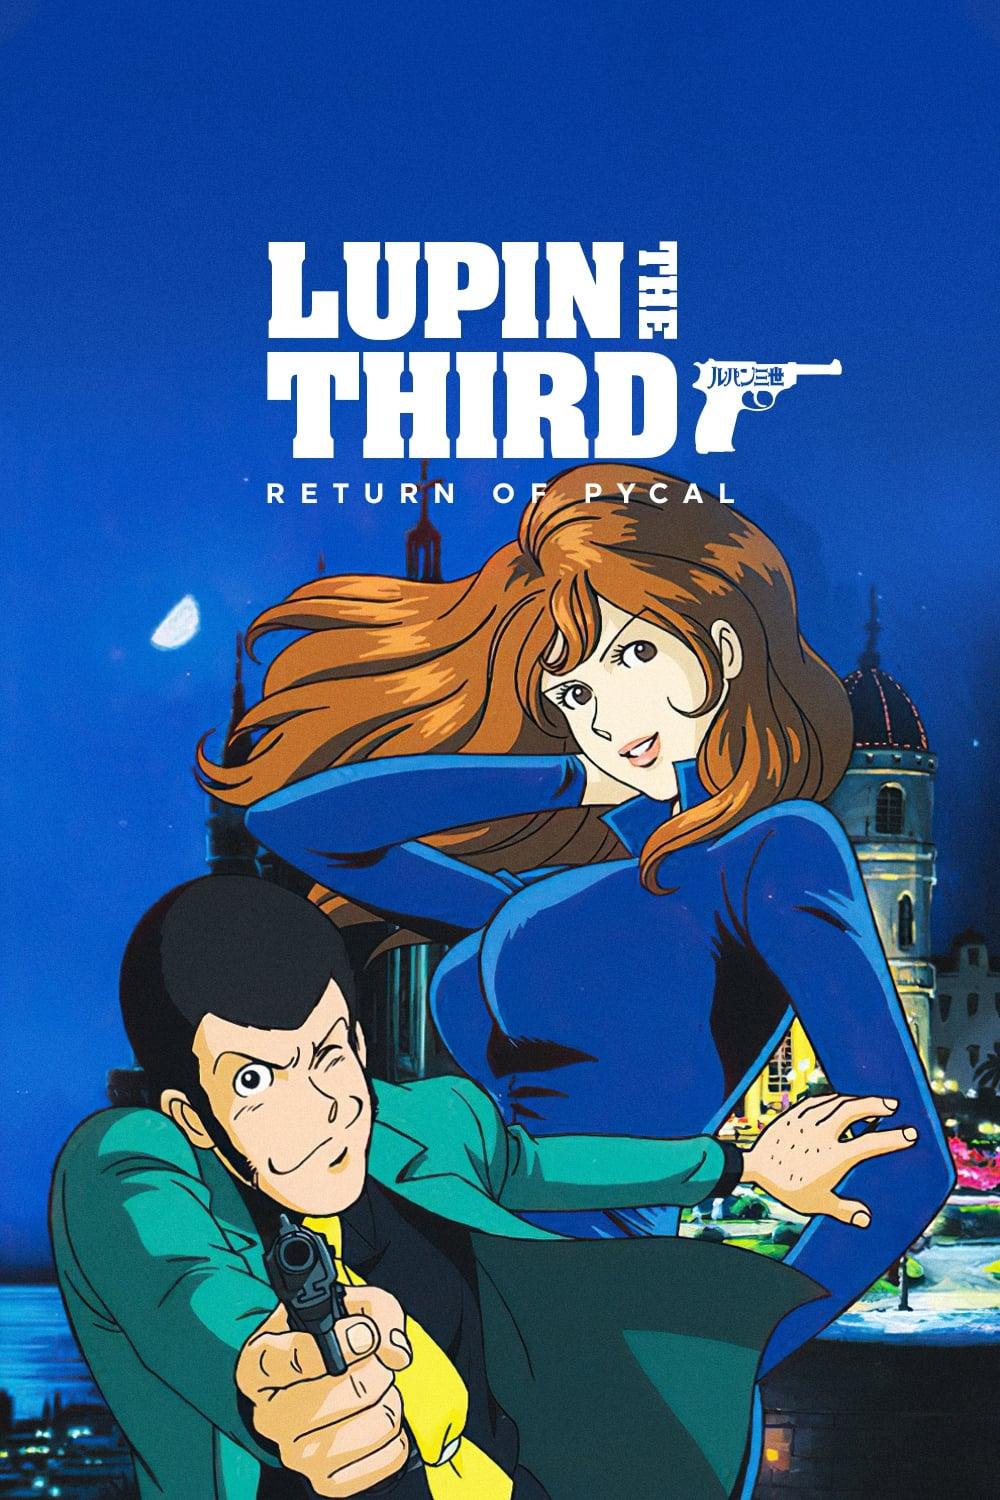 Lupin the Third: Return of Pycal poster